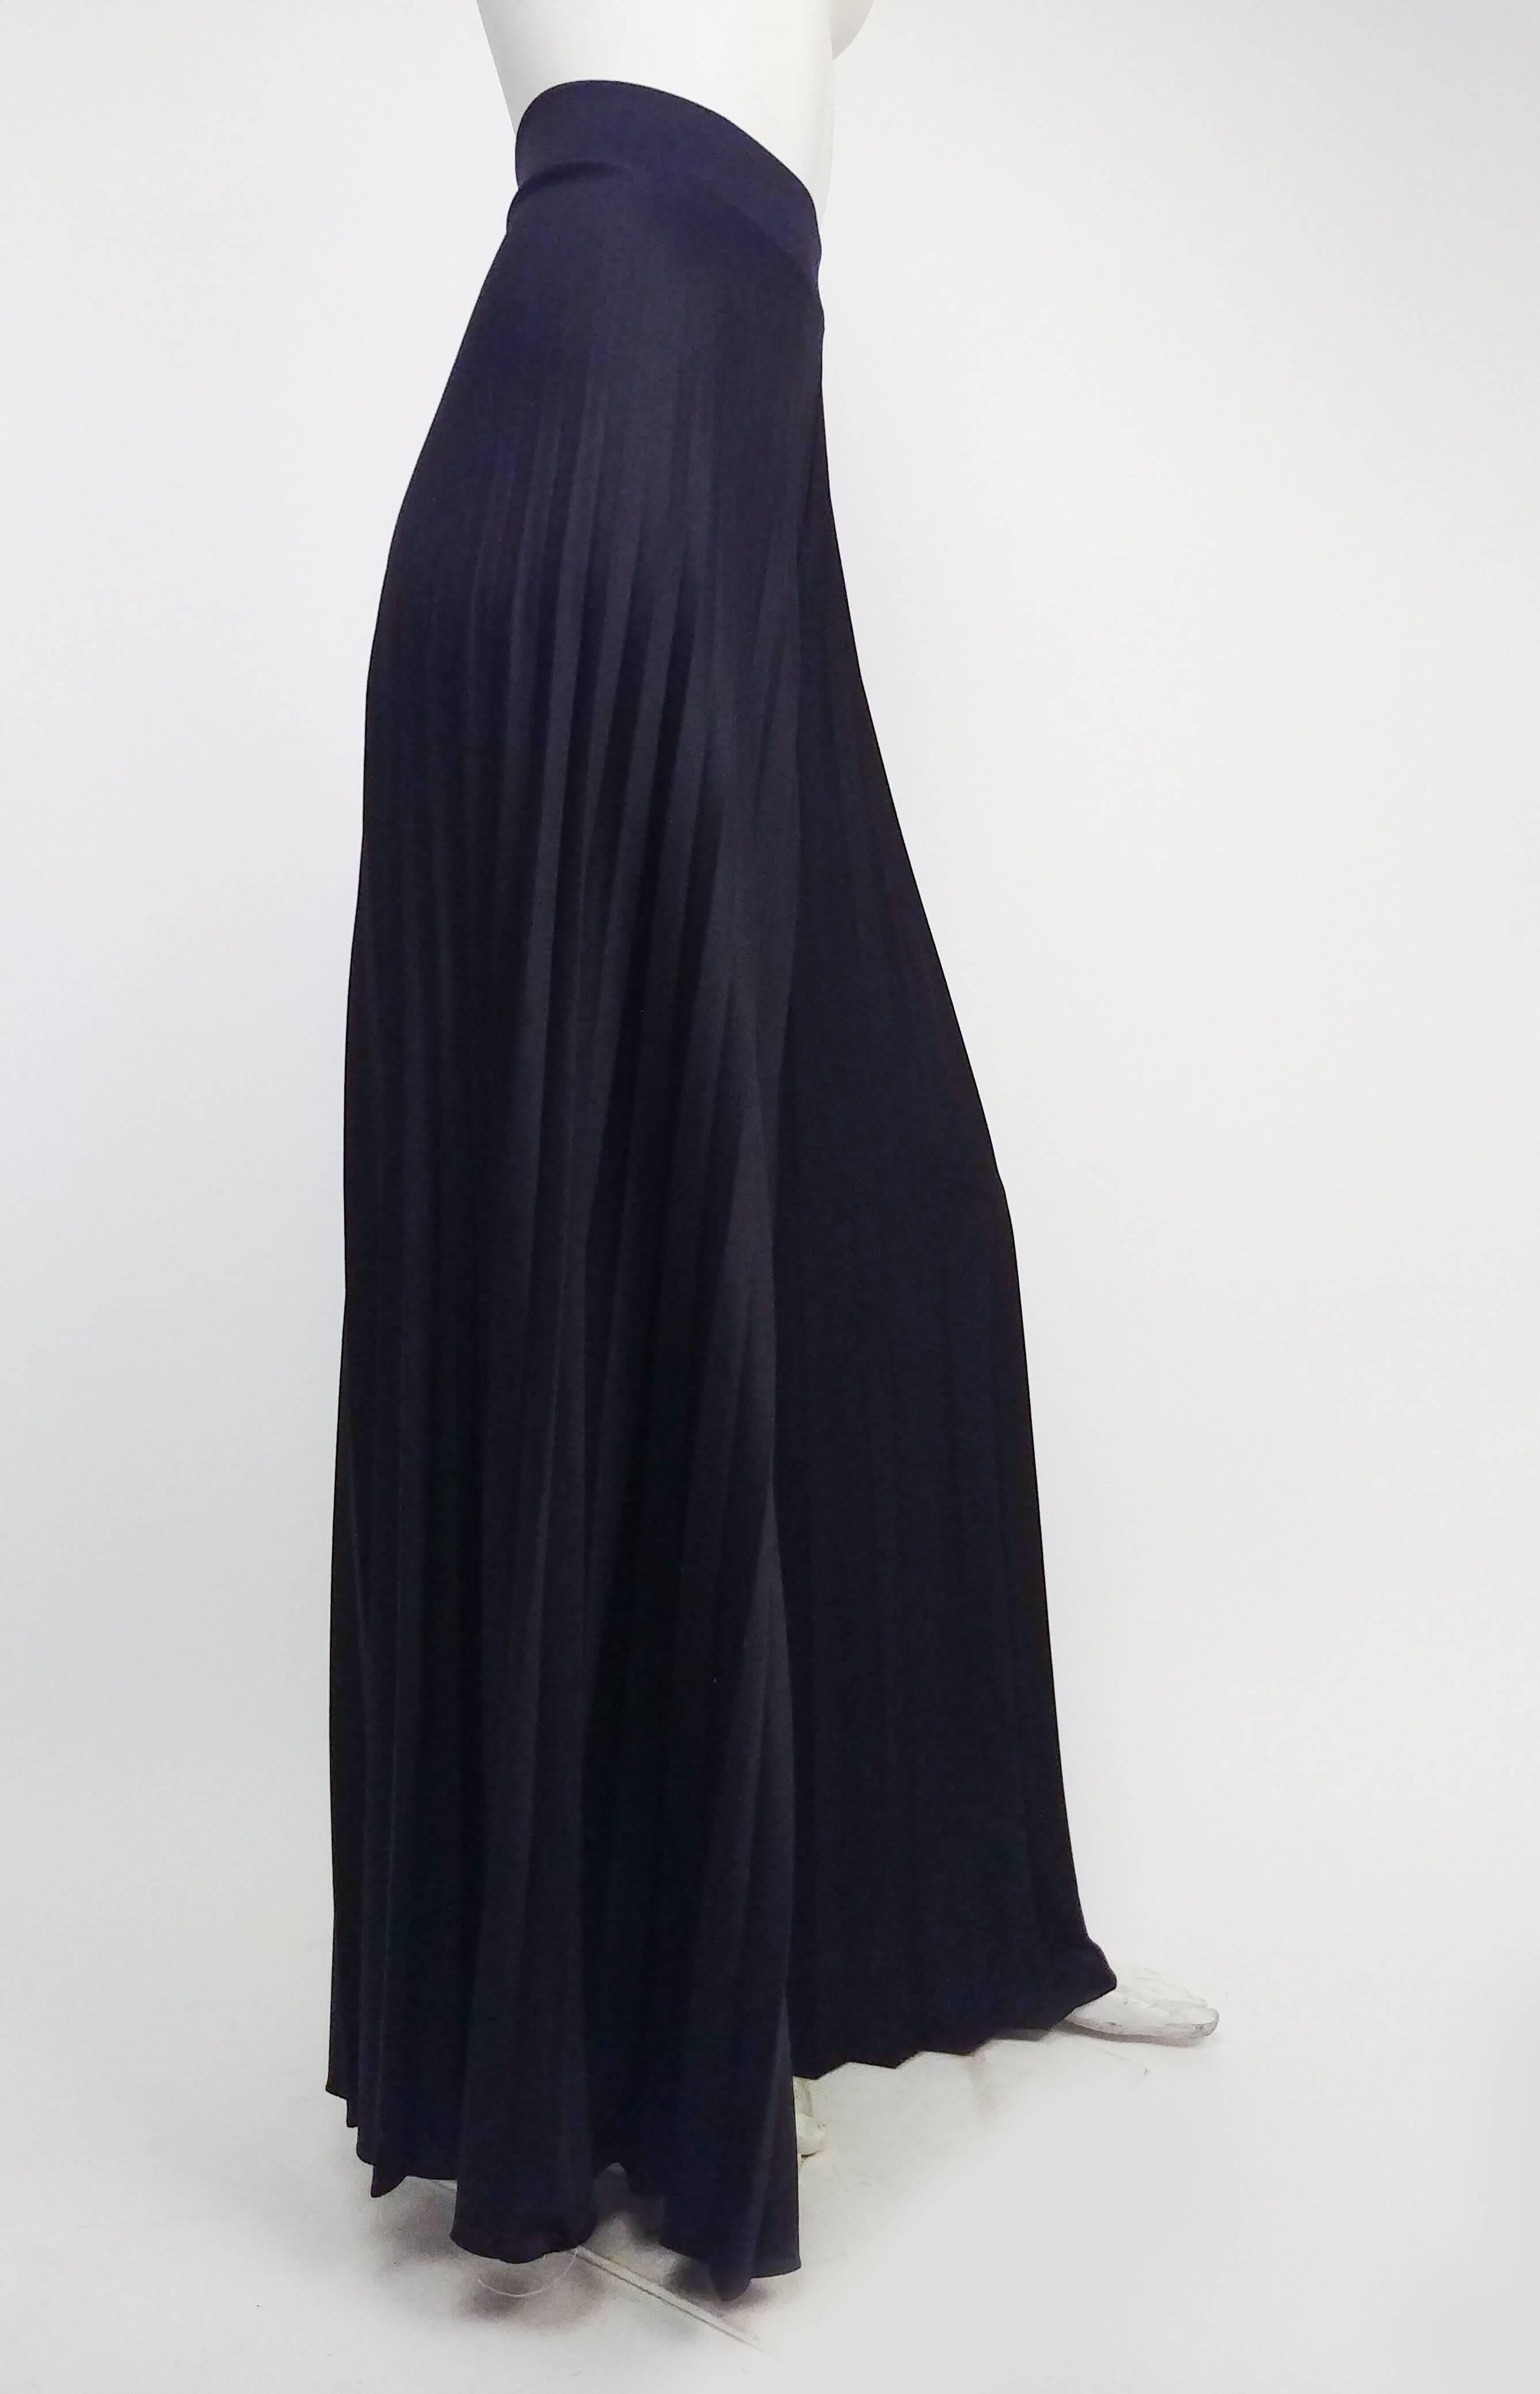 1970s Black Pleated Wide Leg Pants. Elasticated waist. Set pleats created dramatic flare when walking or dancing. 